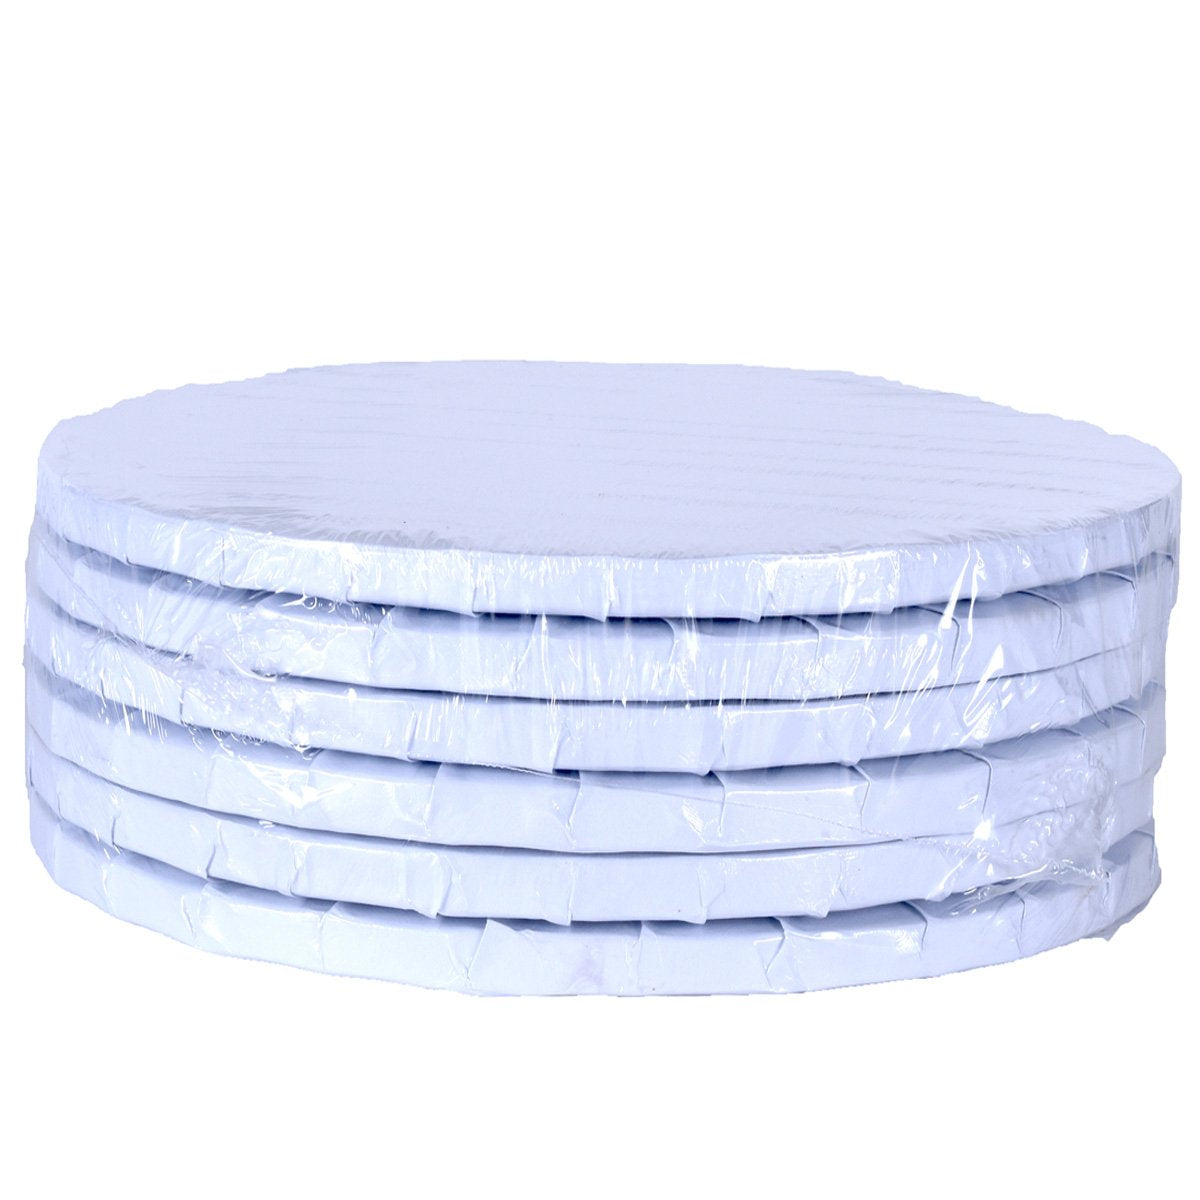 Cake Drums Round 14 Inches - White - Sturdy 1/2 Inch Thick